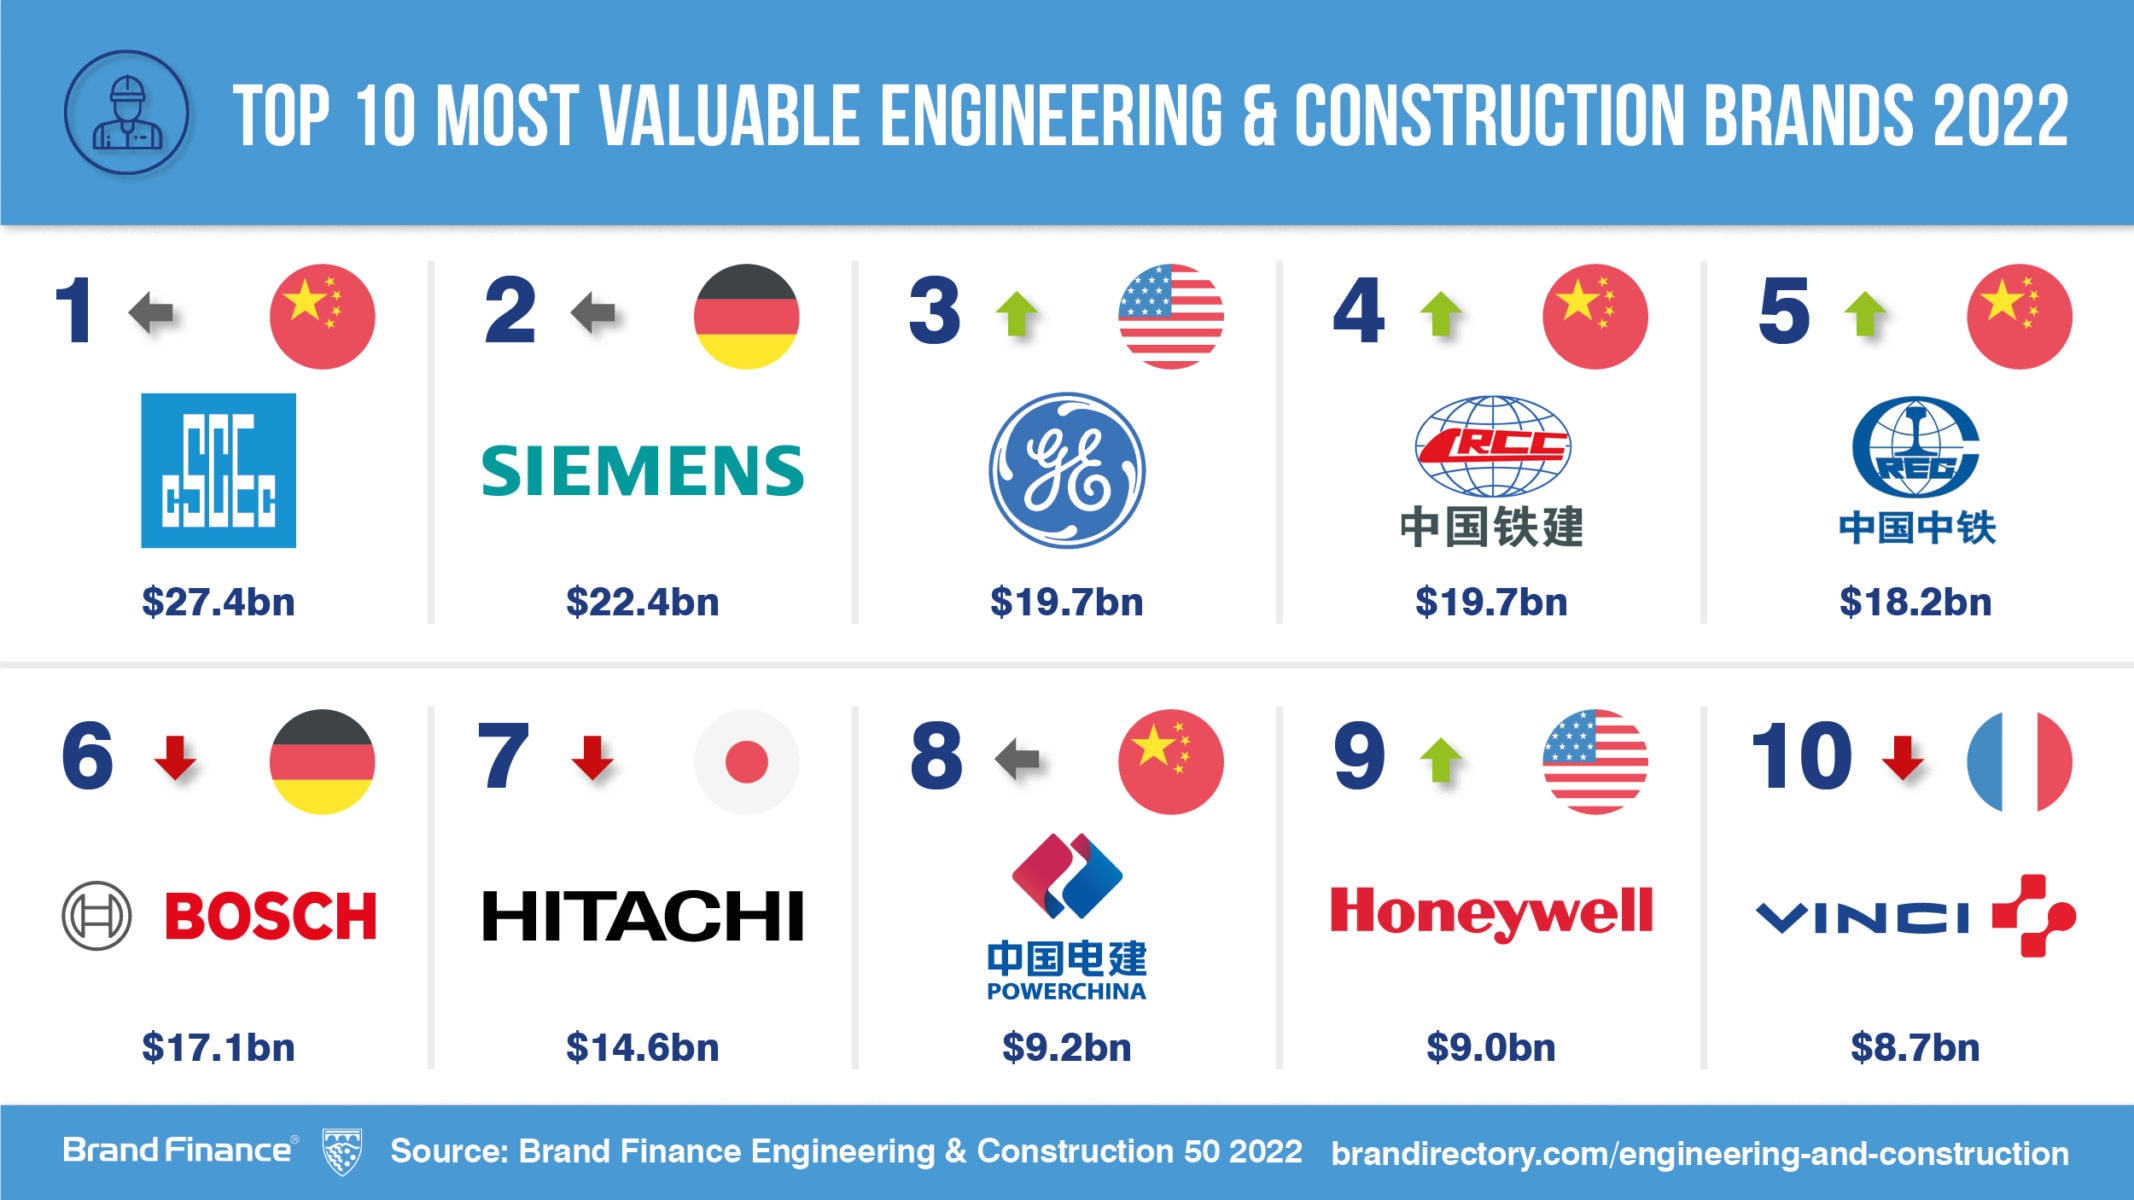 Most Chinese engineering and construction brands grow through pandemic as  CSCEC remains world's most valuable, Press Release